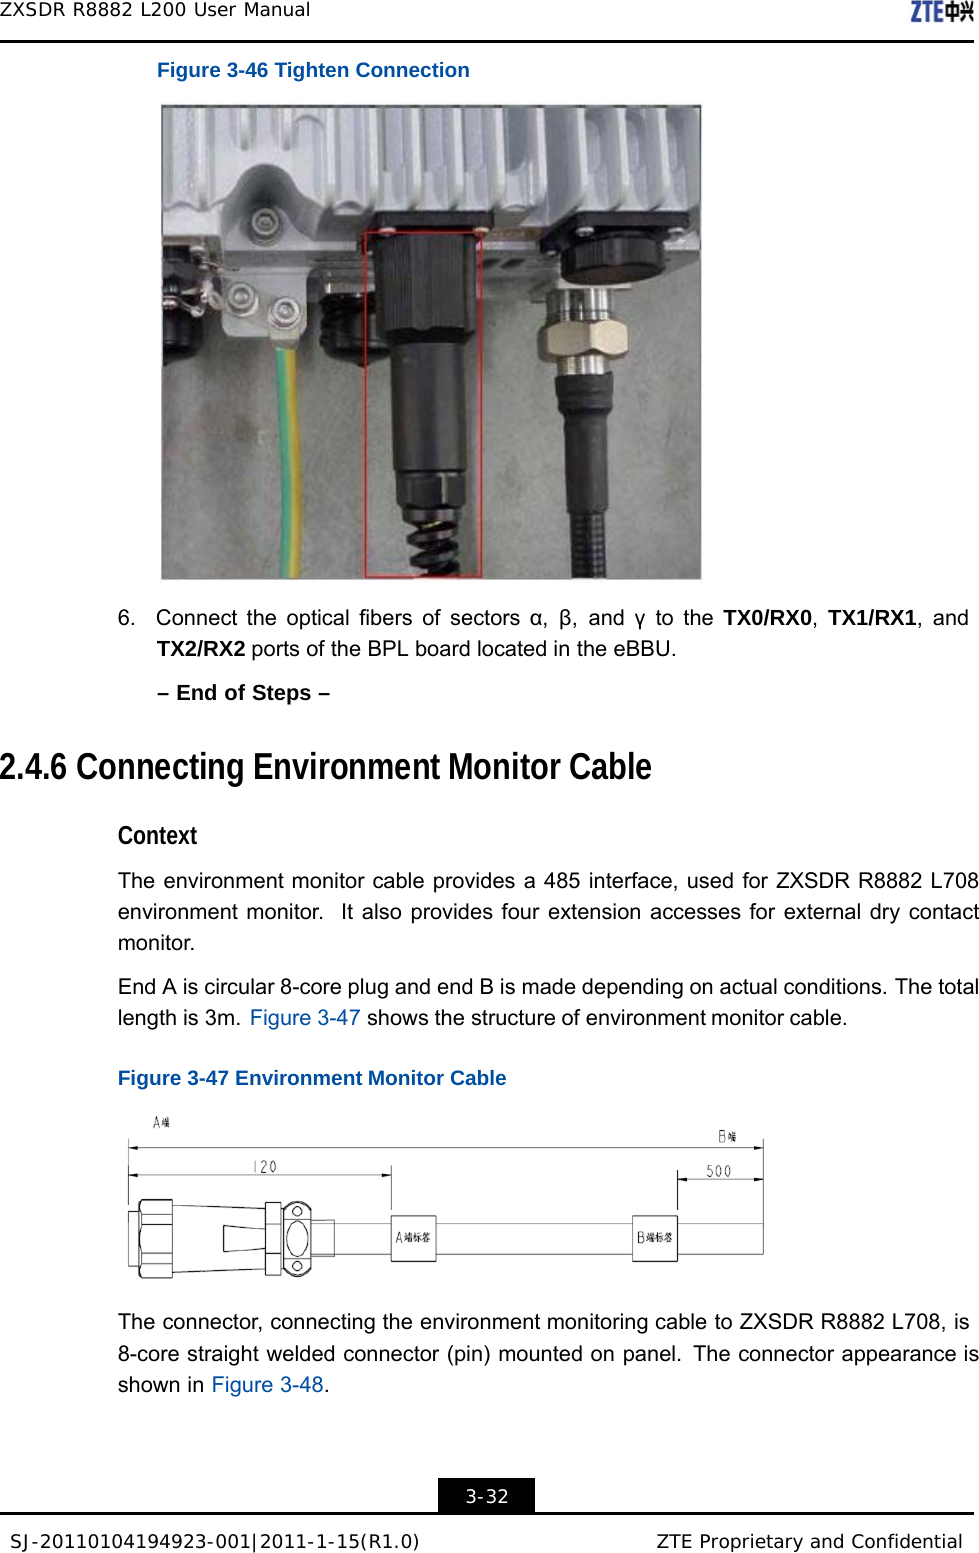 SJ-20110104194923-001|2011-1-15(R1.0) ZTE Proprietary and Confidential ZXSDR R8882 L200 User Manual    Figure 3-46 Tighten Connection    6.  Connect the optical fibers of sectors α,  β, and γ to the TX0/RX0,  TX1/RX1, and TX2/RX2 ports of the BPL board located in the eBBU.  – End of Steps –   2.4.6 Connecting Environment Monitor Cable   Context  The environment monitor cable provides a 485 interface, used for ZXSDR R8882 L708 environment monitor.  It also provides four extension accesses for external dry contact monitor.  End A is circular 8-core plug and end B is made depending on actual conditions. The total length is 3m.  Figure 3-47 shows the structure of environment monitor cable.  Figure 3-47 Environment Monitor Cable    The connector, connecting the environment monitoring cable to ZXSDR R8882 L708, is 8-core straight welded connector (pin) mounted on panel.  The connector appearance is shown in Figure 3-48.     3-32 